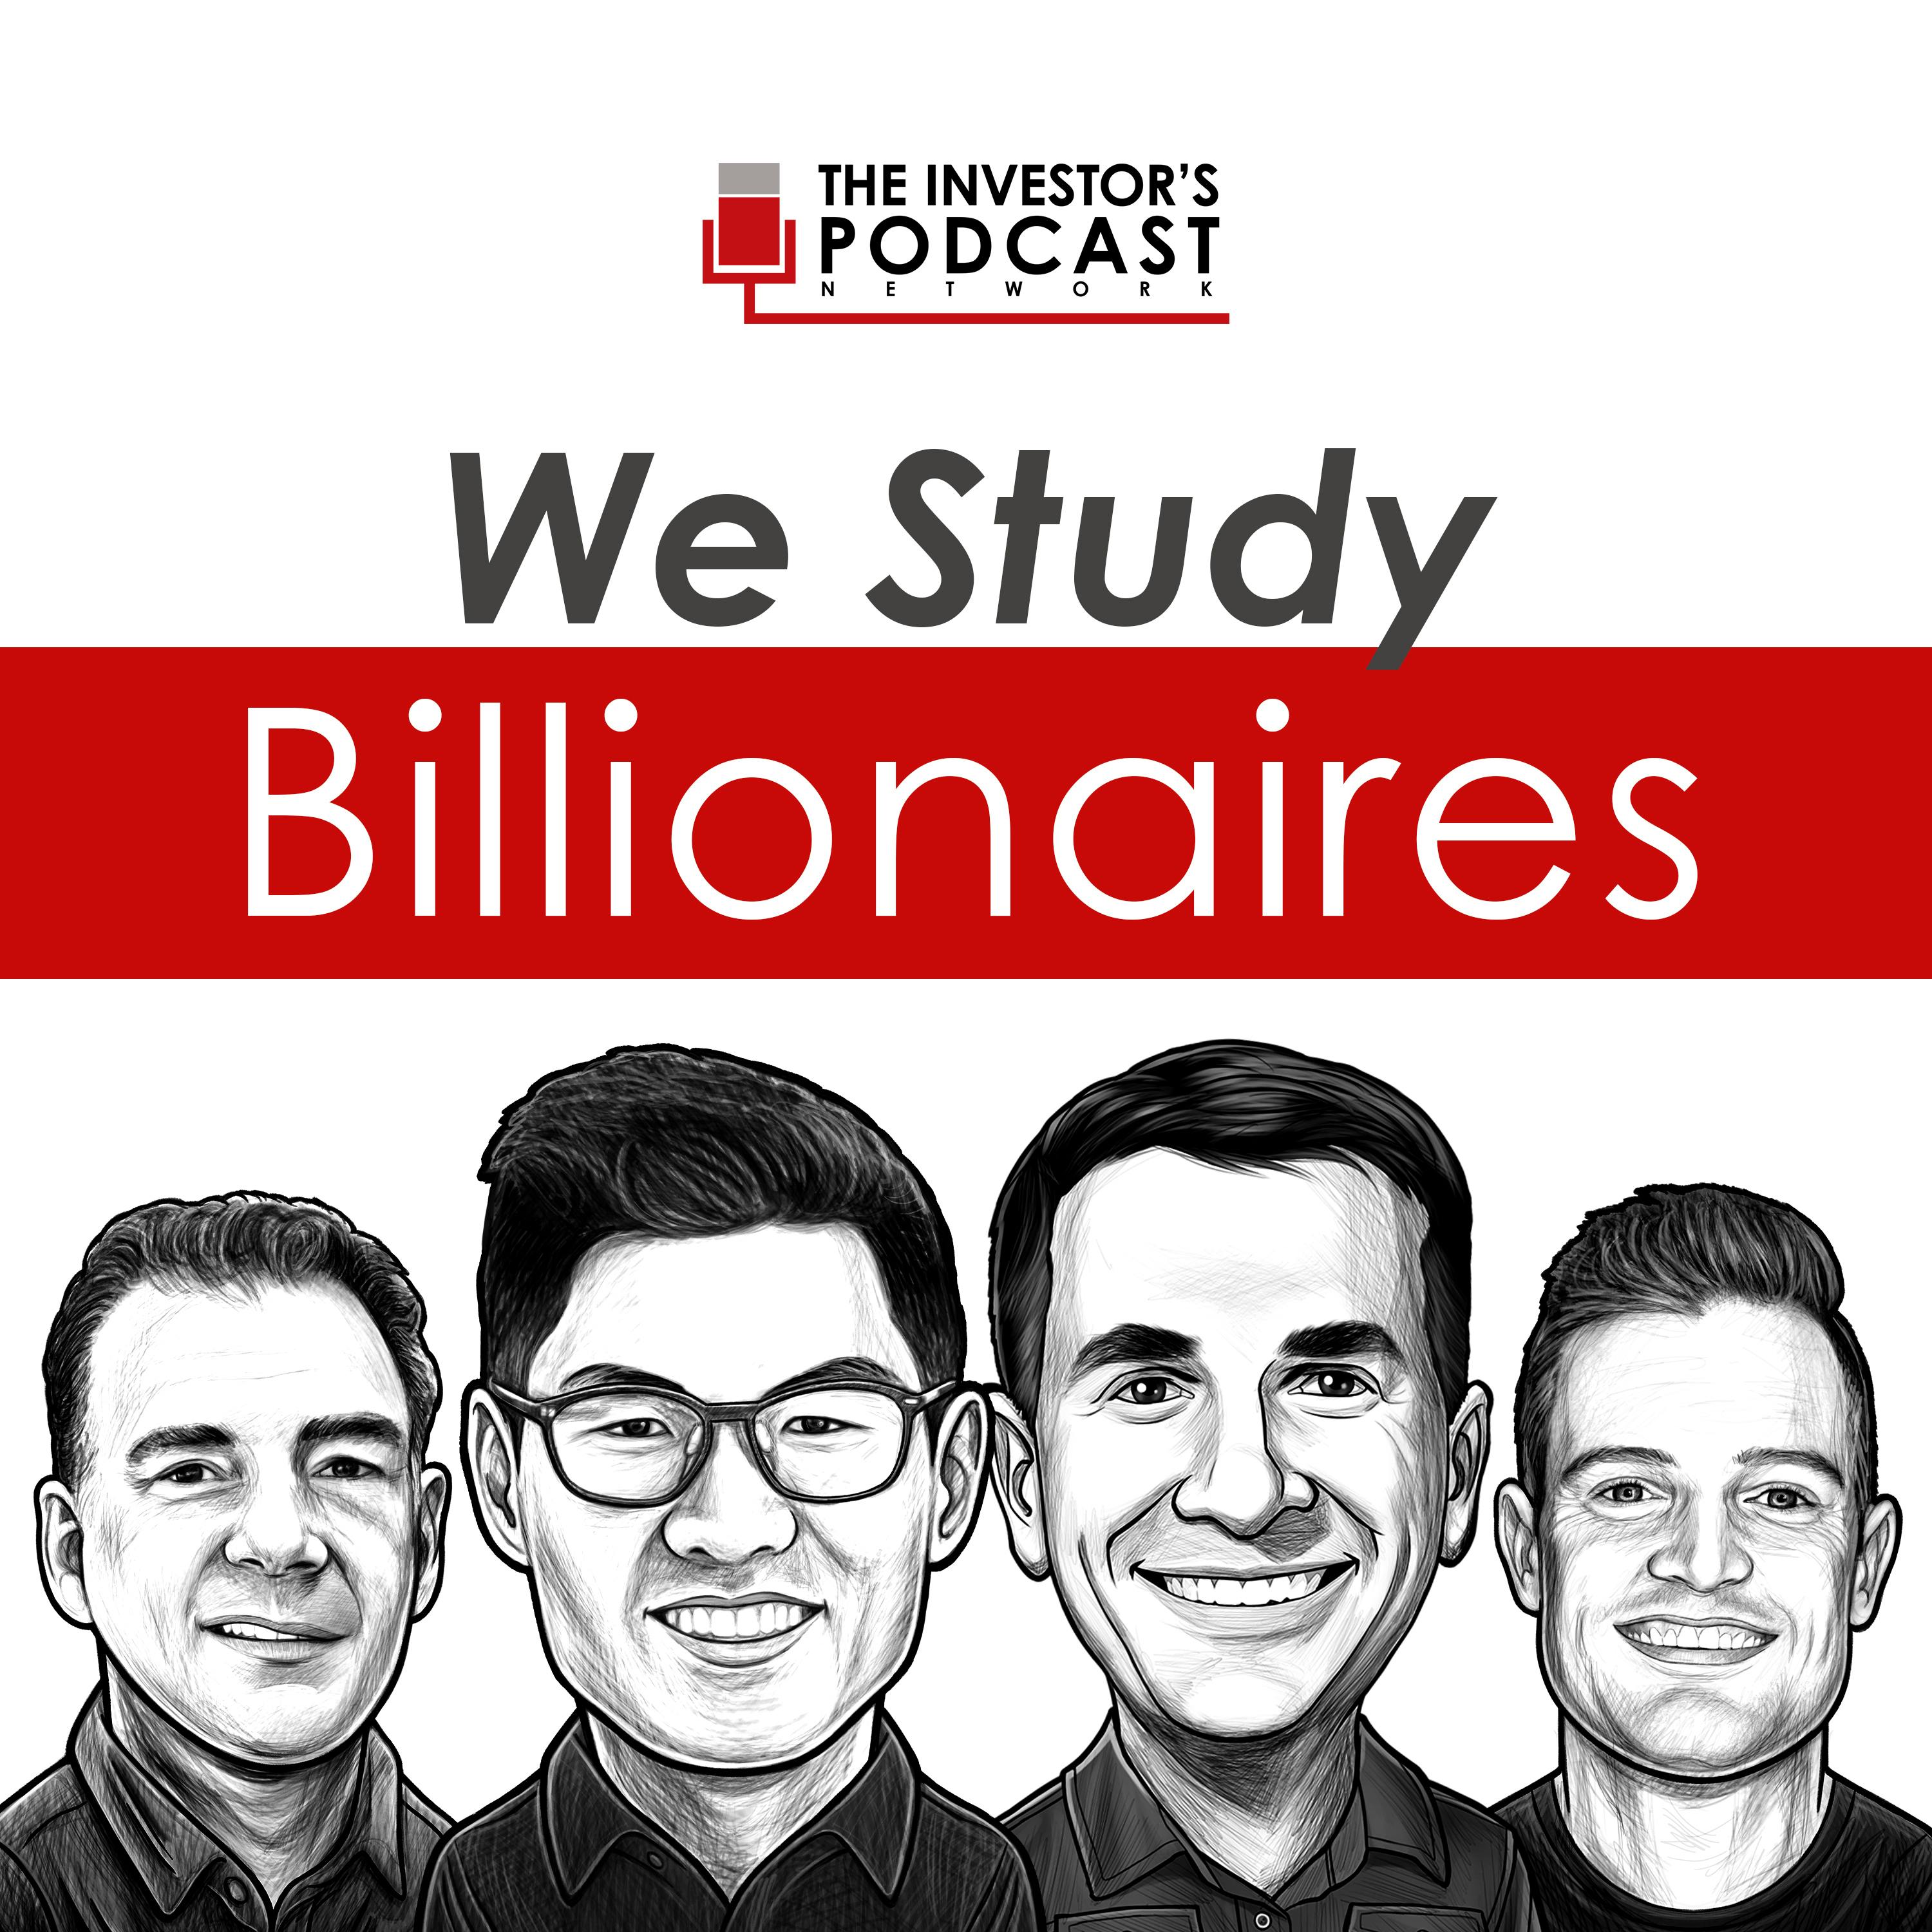 We Study Billionaires by The Investor's Podcast Network